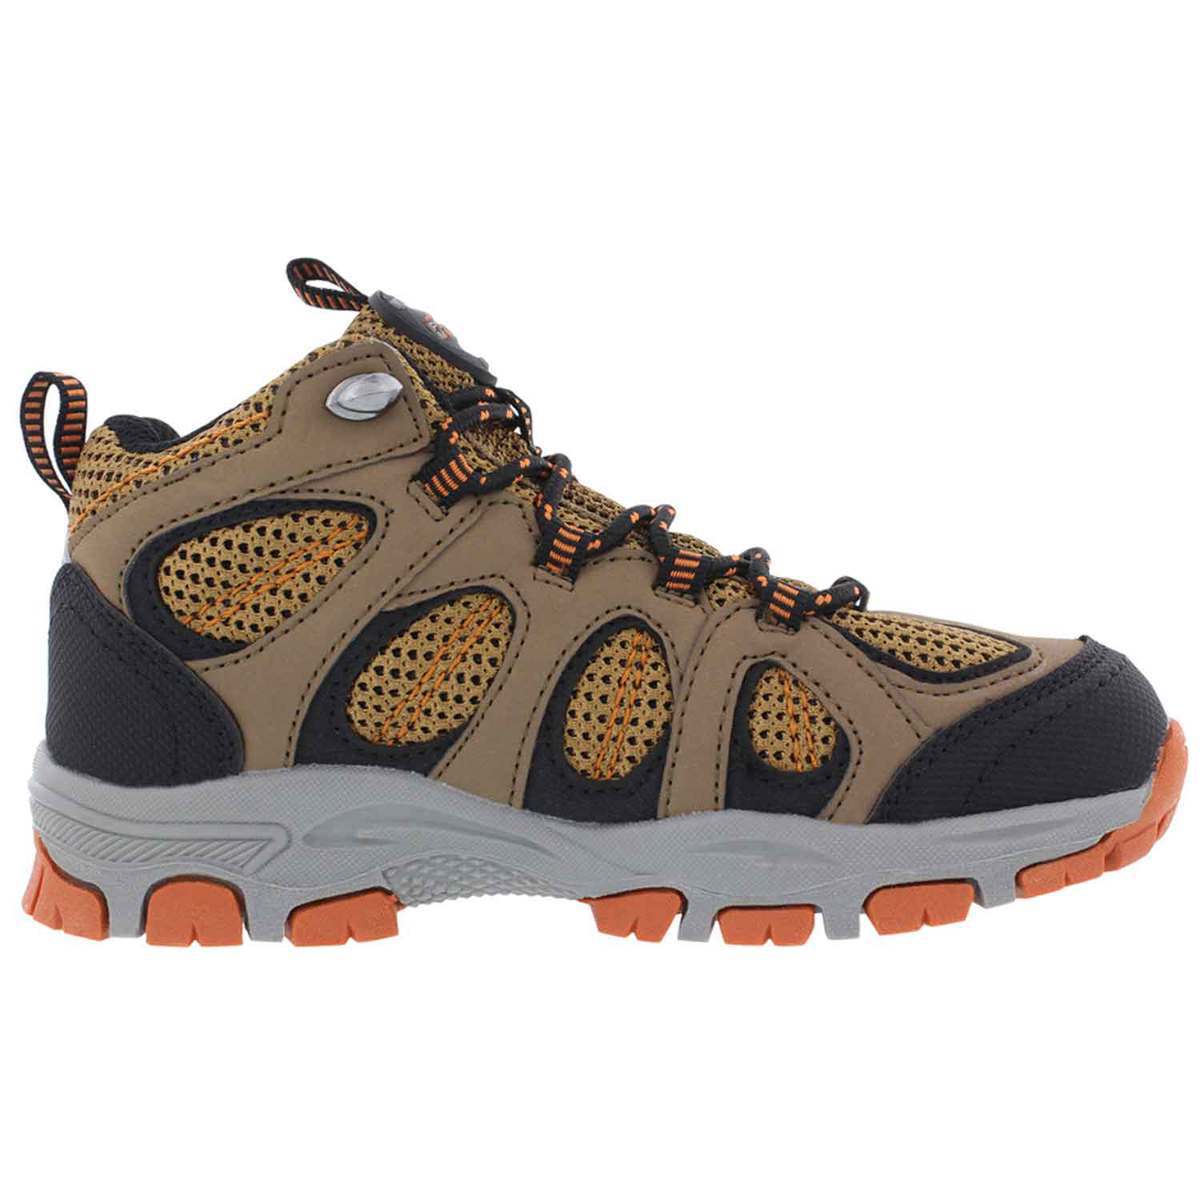 Pacific Mountain Youth Cedar Waterproof Mid Hiking Boots - Brown - Size ...